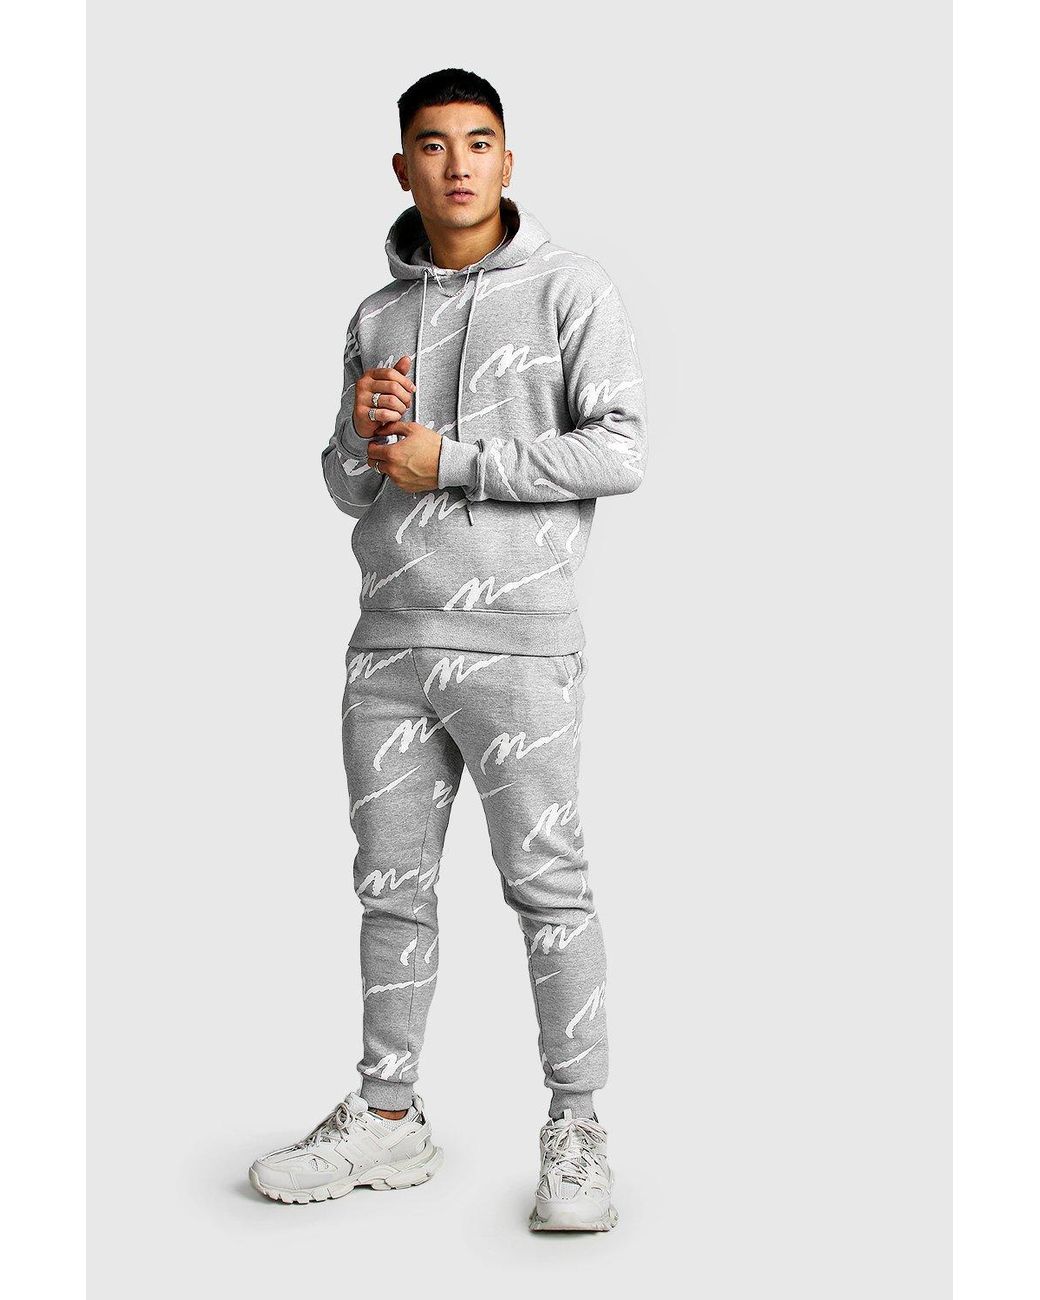 BoohooMAN Cotton All Over Man Printed Hooded Tracksuit in Grey (Gray ...